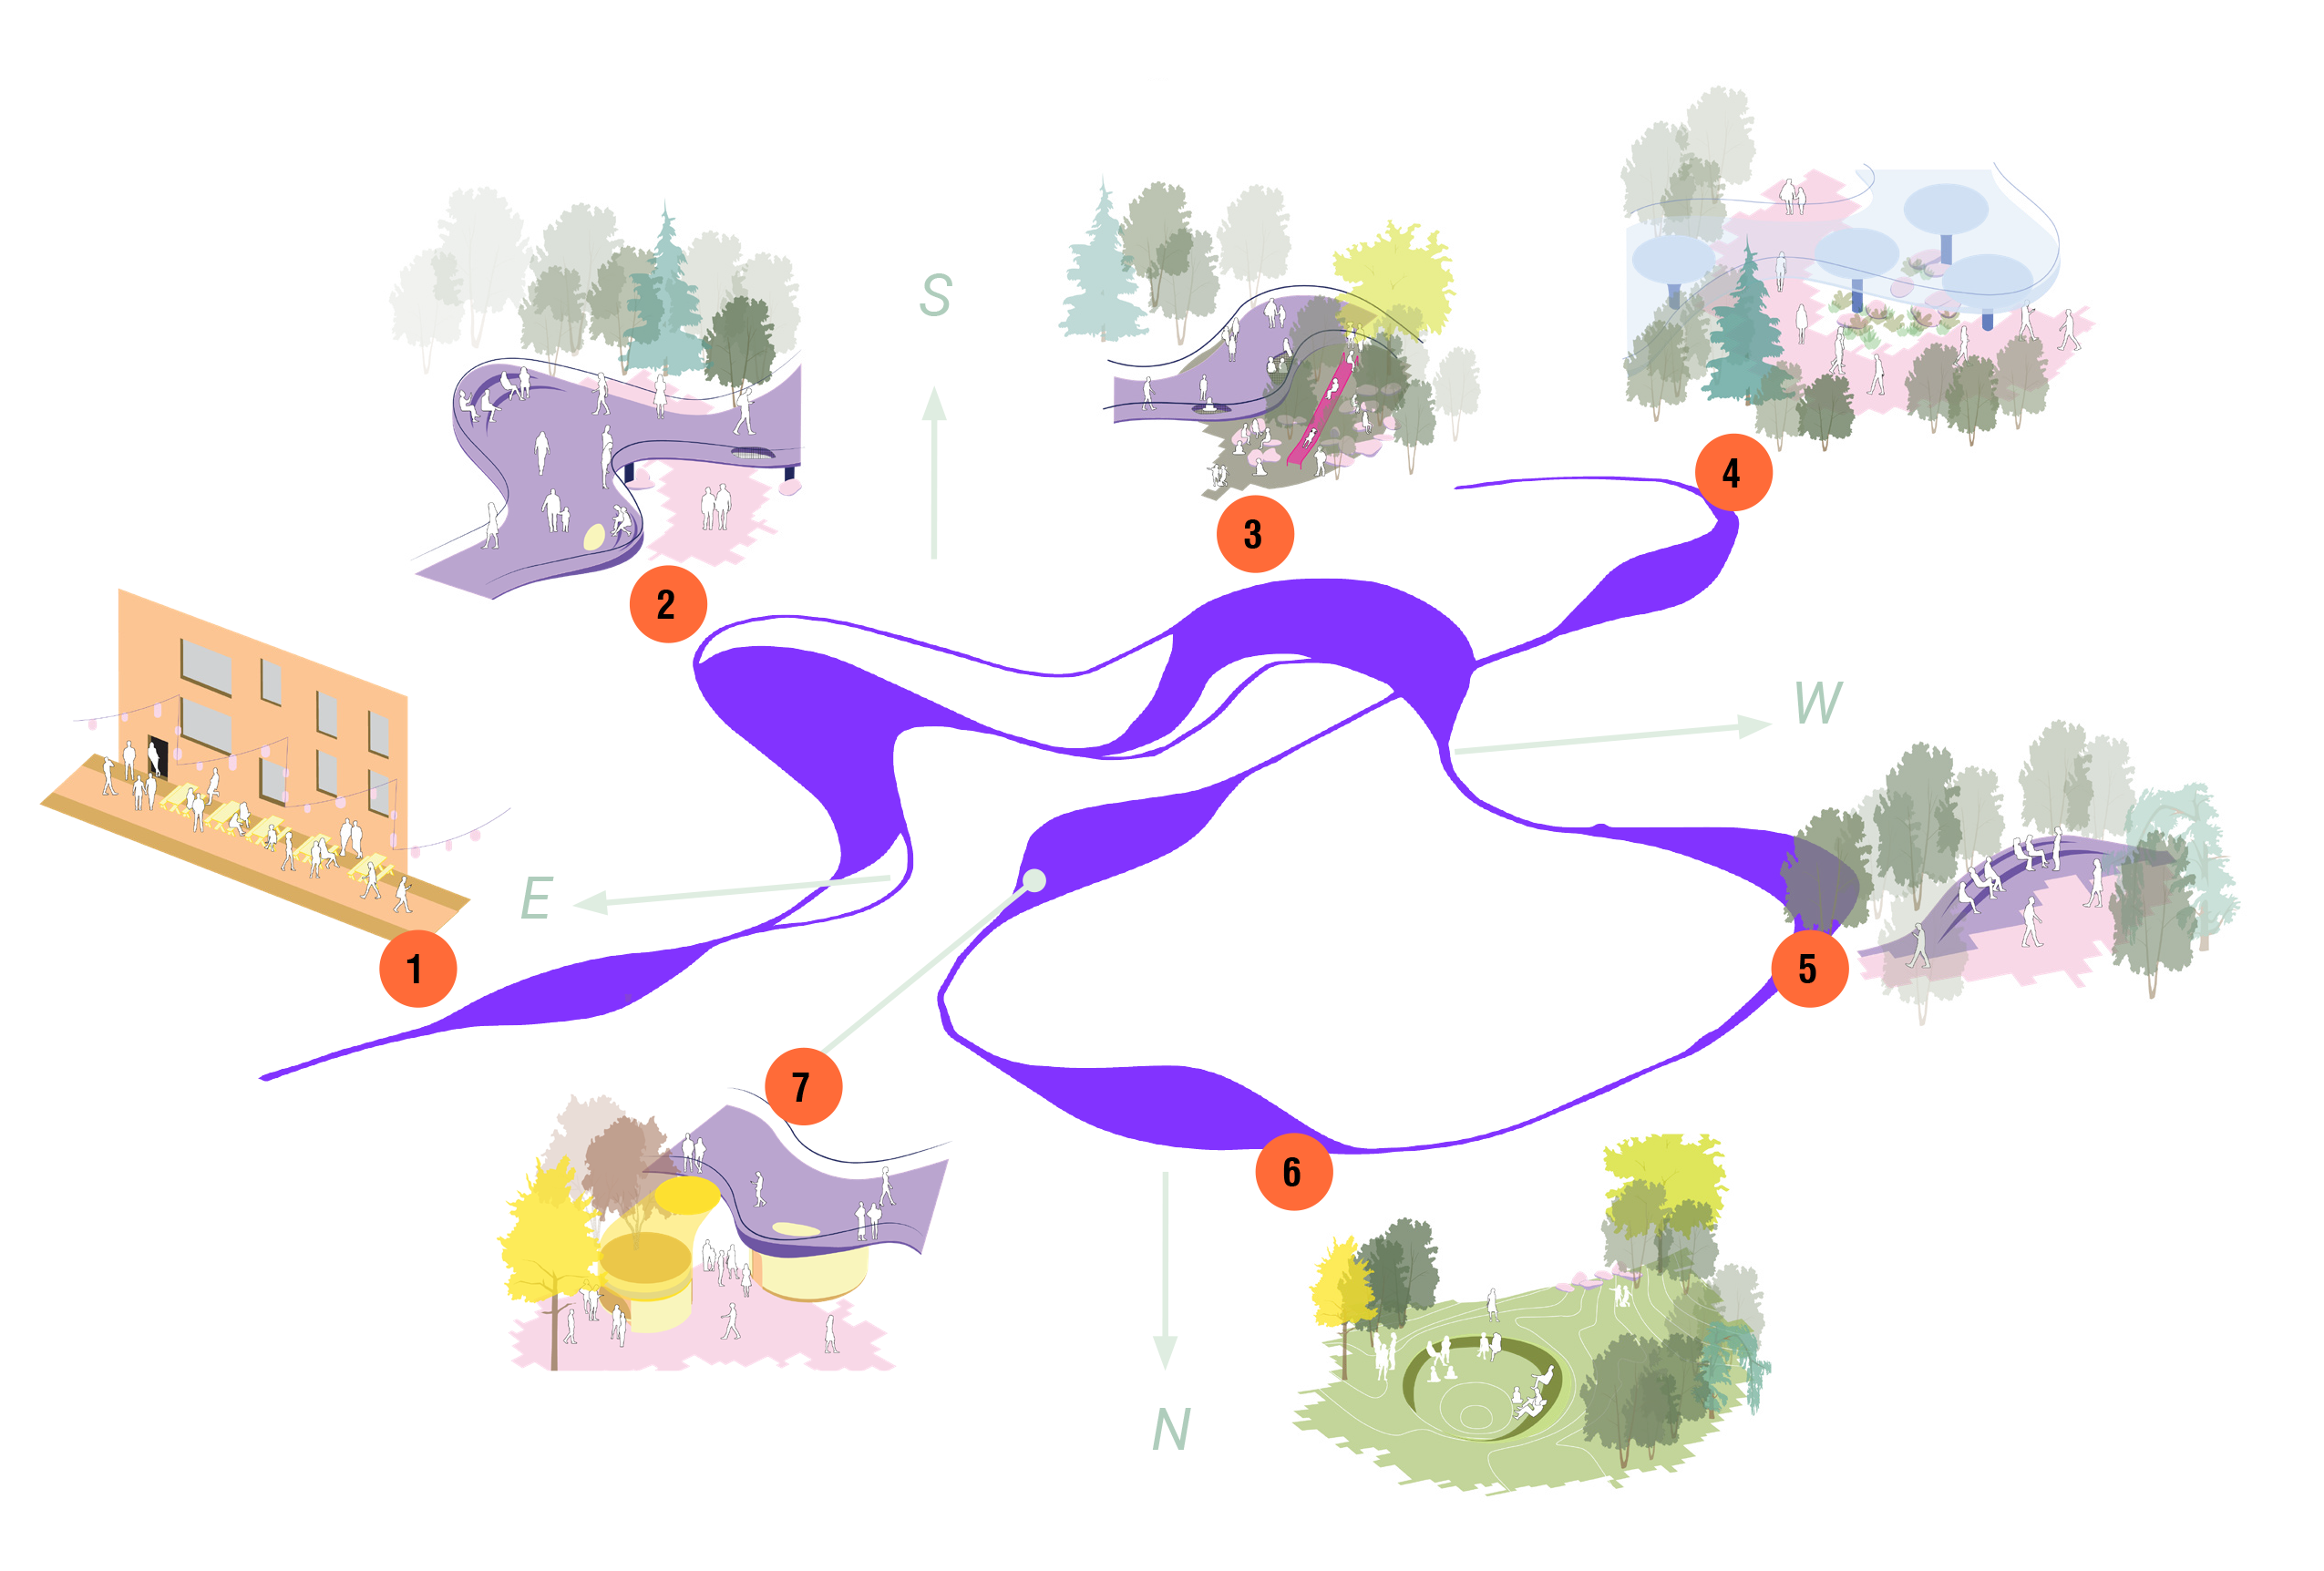 A diagram showing the Seven Stepping Stones concept and Indigenous teaching that inspired the layout of Wàwàtesí. At the center of the image is a purple river with seven stepping stones in it. They are, in order: first, the Eastern Gateway, an entry portal through the historic Laneways; second, the Balcony, a gently elevated pathway bridging over the park; third, the Riverbed Playscape, a rugged playground in a natural rocky setting; fourth, the Canvas, the underbelly of the Balcony and the primary projection surface for Aki Illuminations and other public art; fifth, the Wave, a curved sitting area that comes out of the park’s path; sixth, the Green, the park’s central lawn and gathering space; and seventh, the Source, the park’s washrooms which double as glowing lanterns, a public power source, and a source of free access to water. 